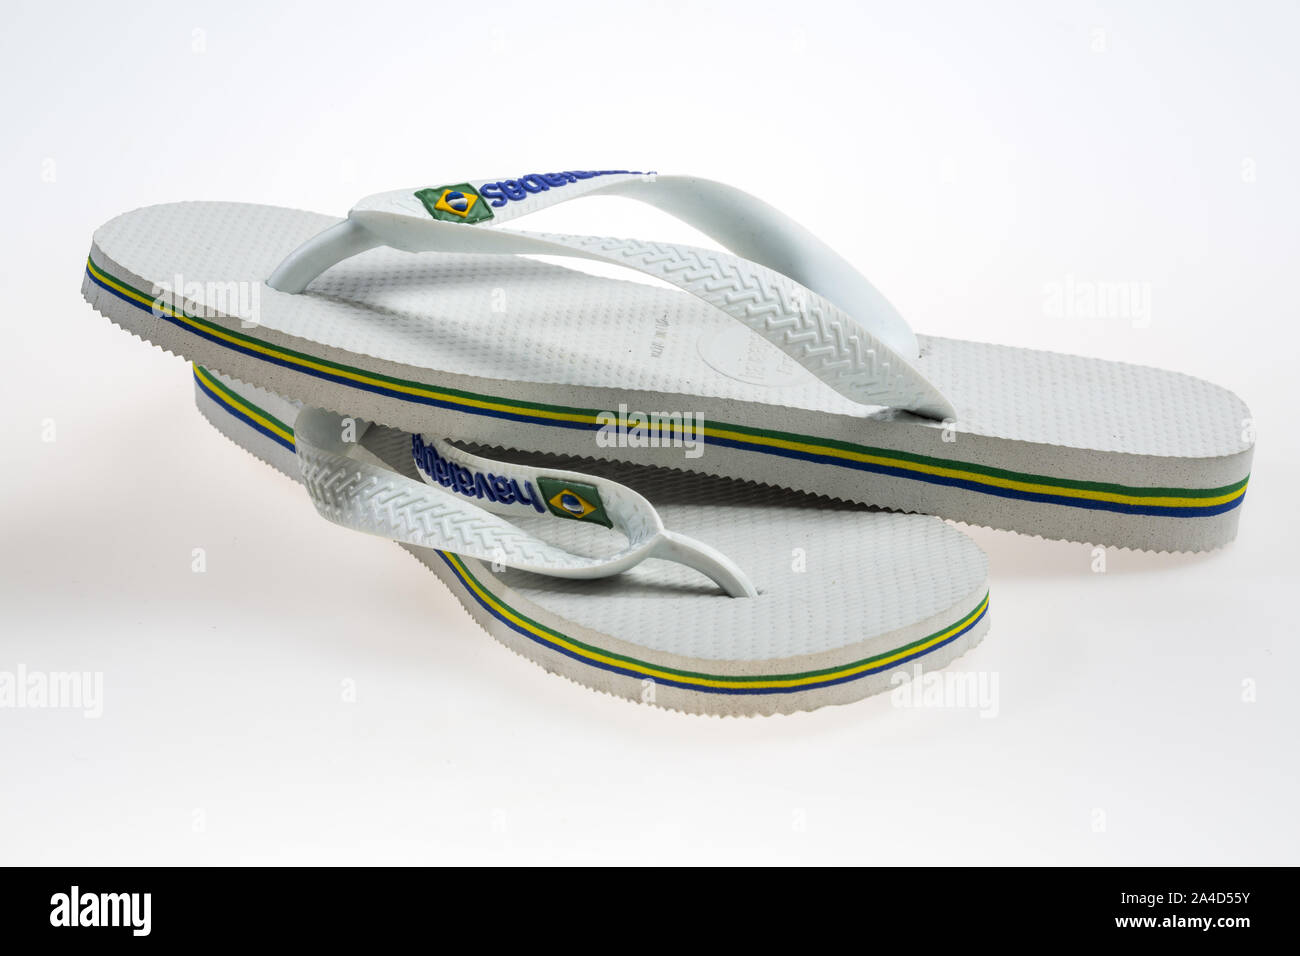 White flip-flops, bath sandals made of plastic with thong bridge and diagonal strap fastening, brand Havaianas, Stock Photo